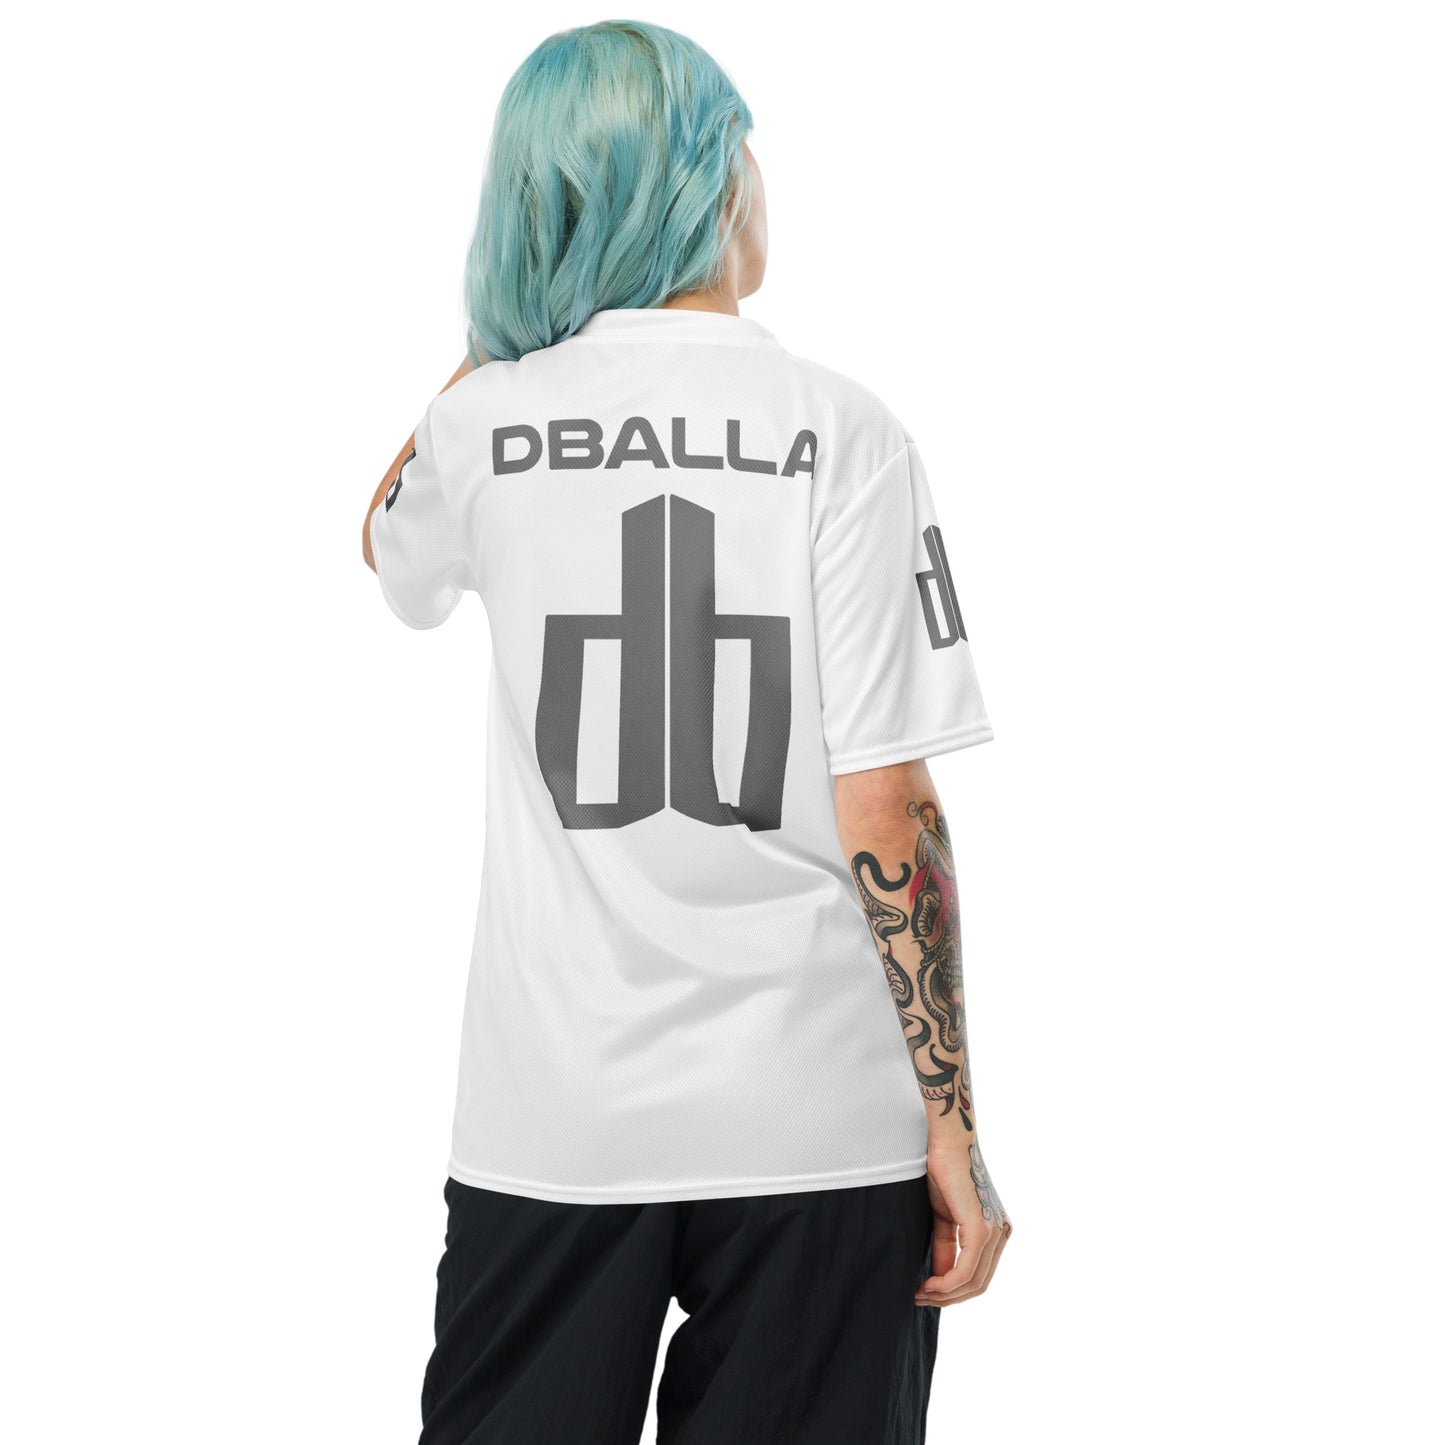 "SKY RISER" Recycled unisex sports jersey - White